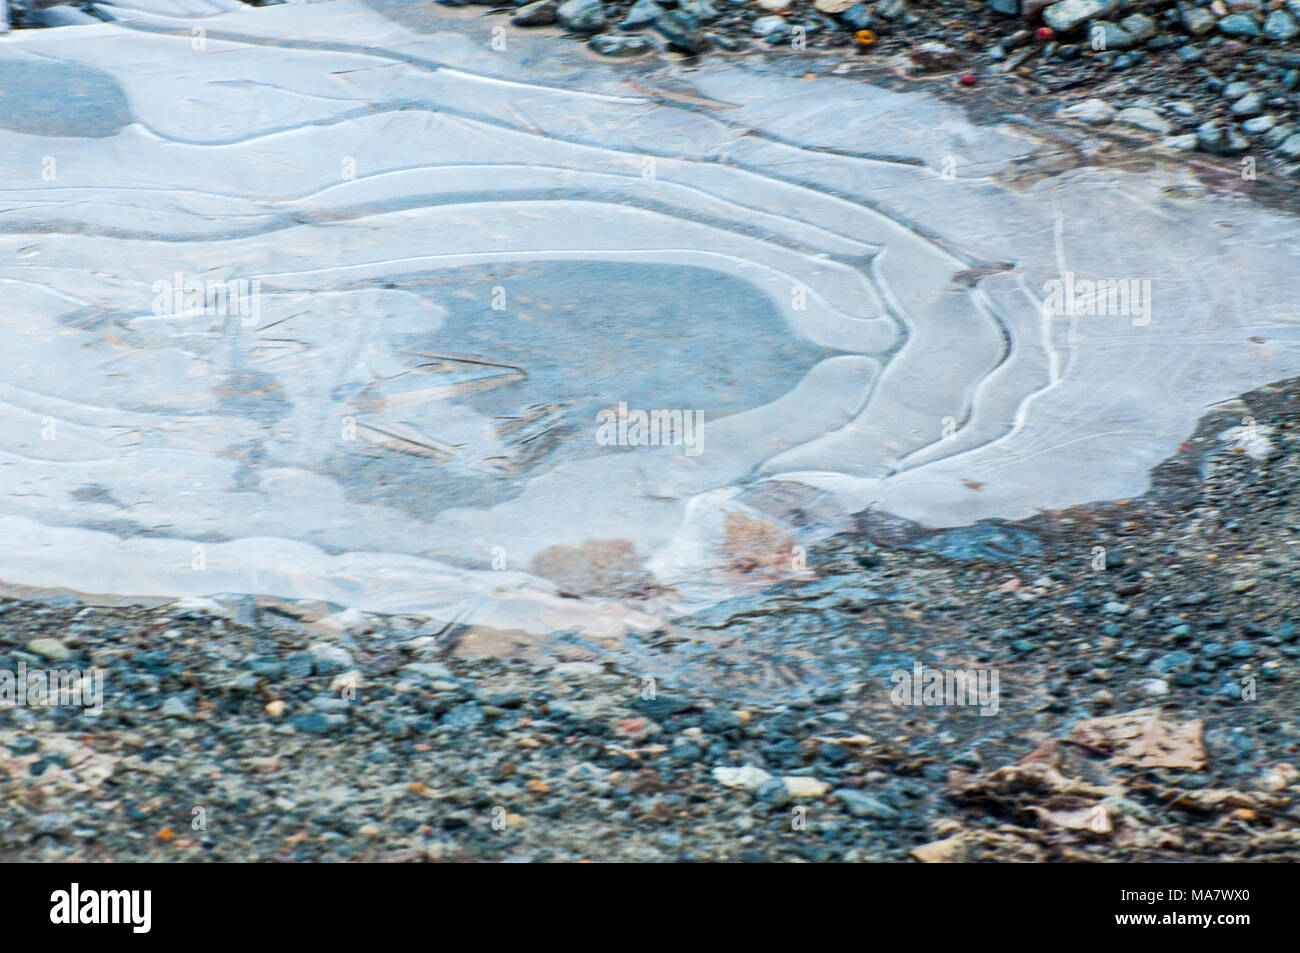 Forming ice formations creates a abstract design. Stock Photo